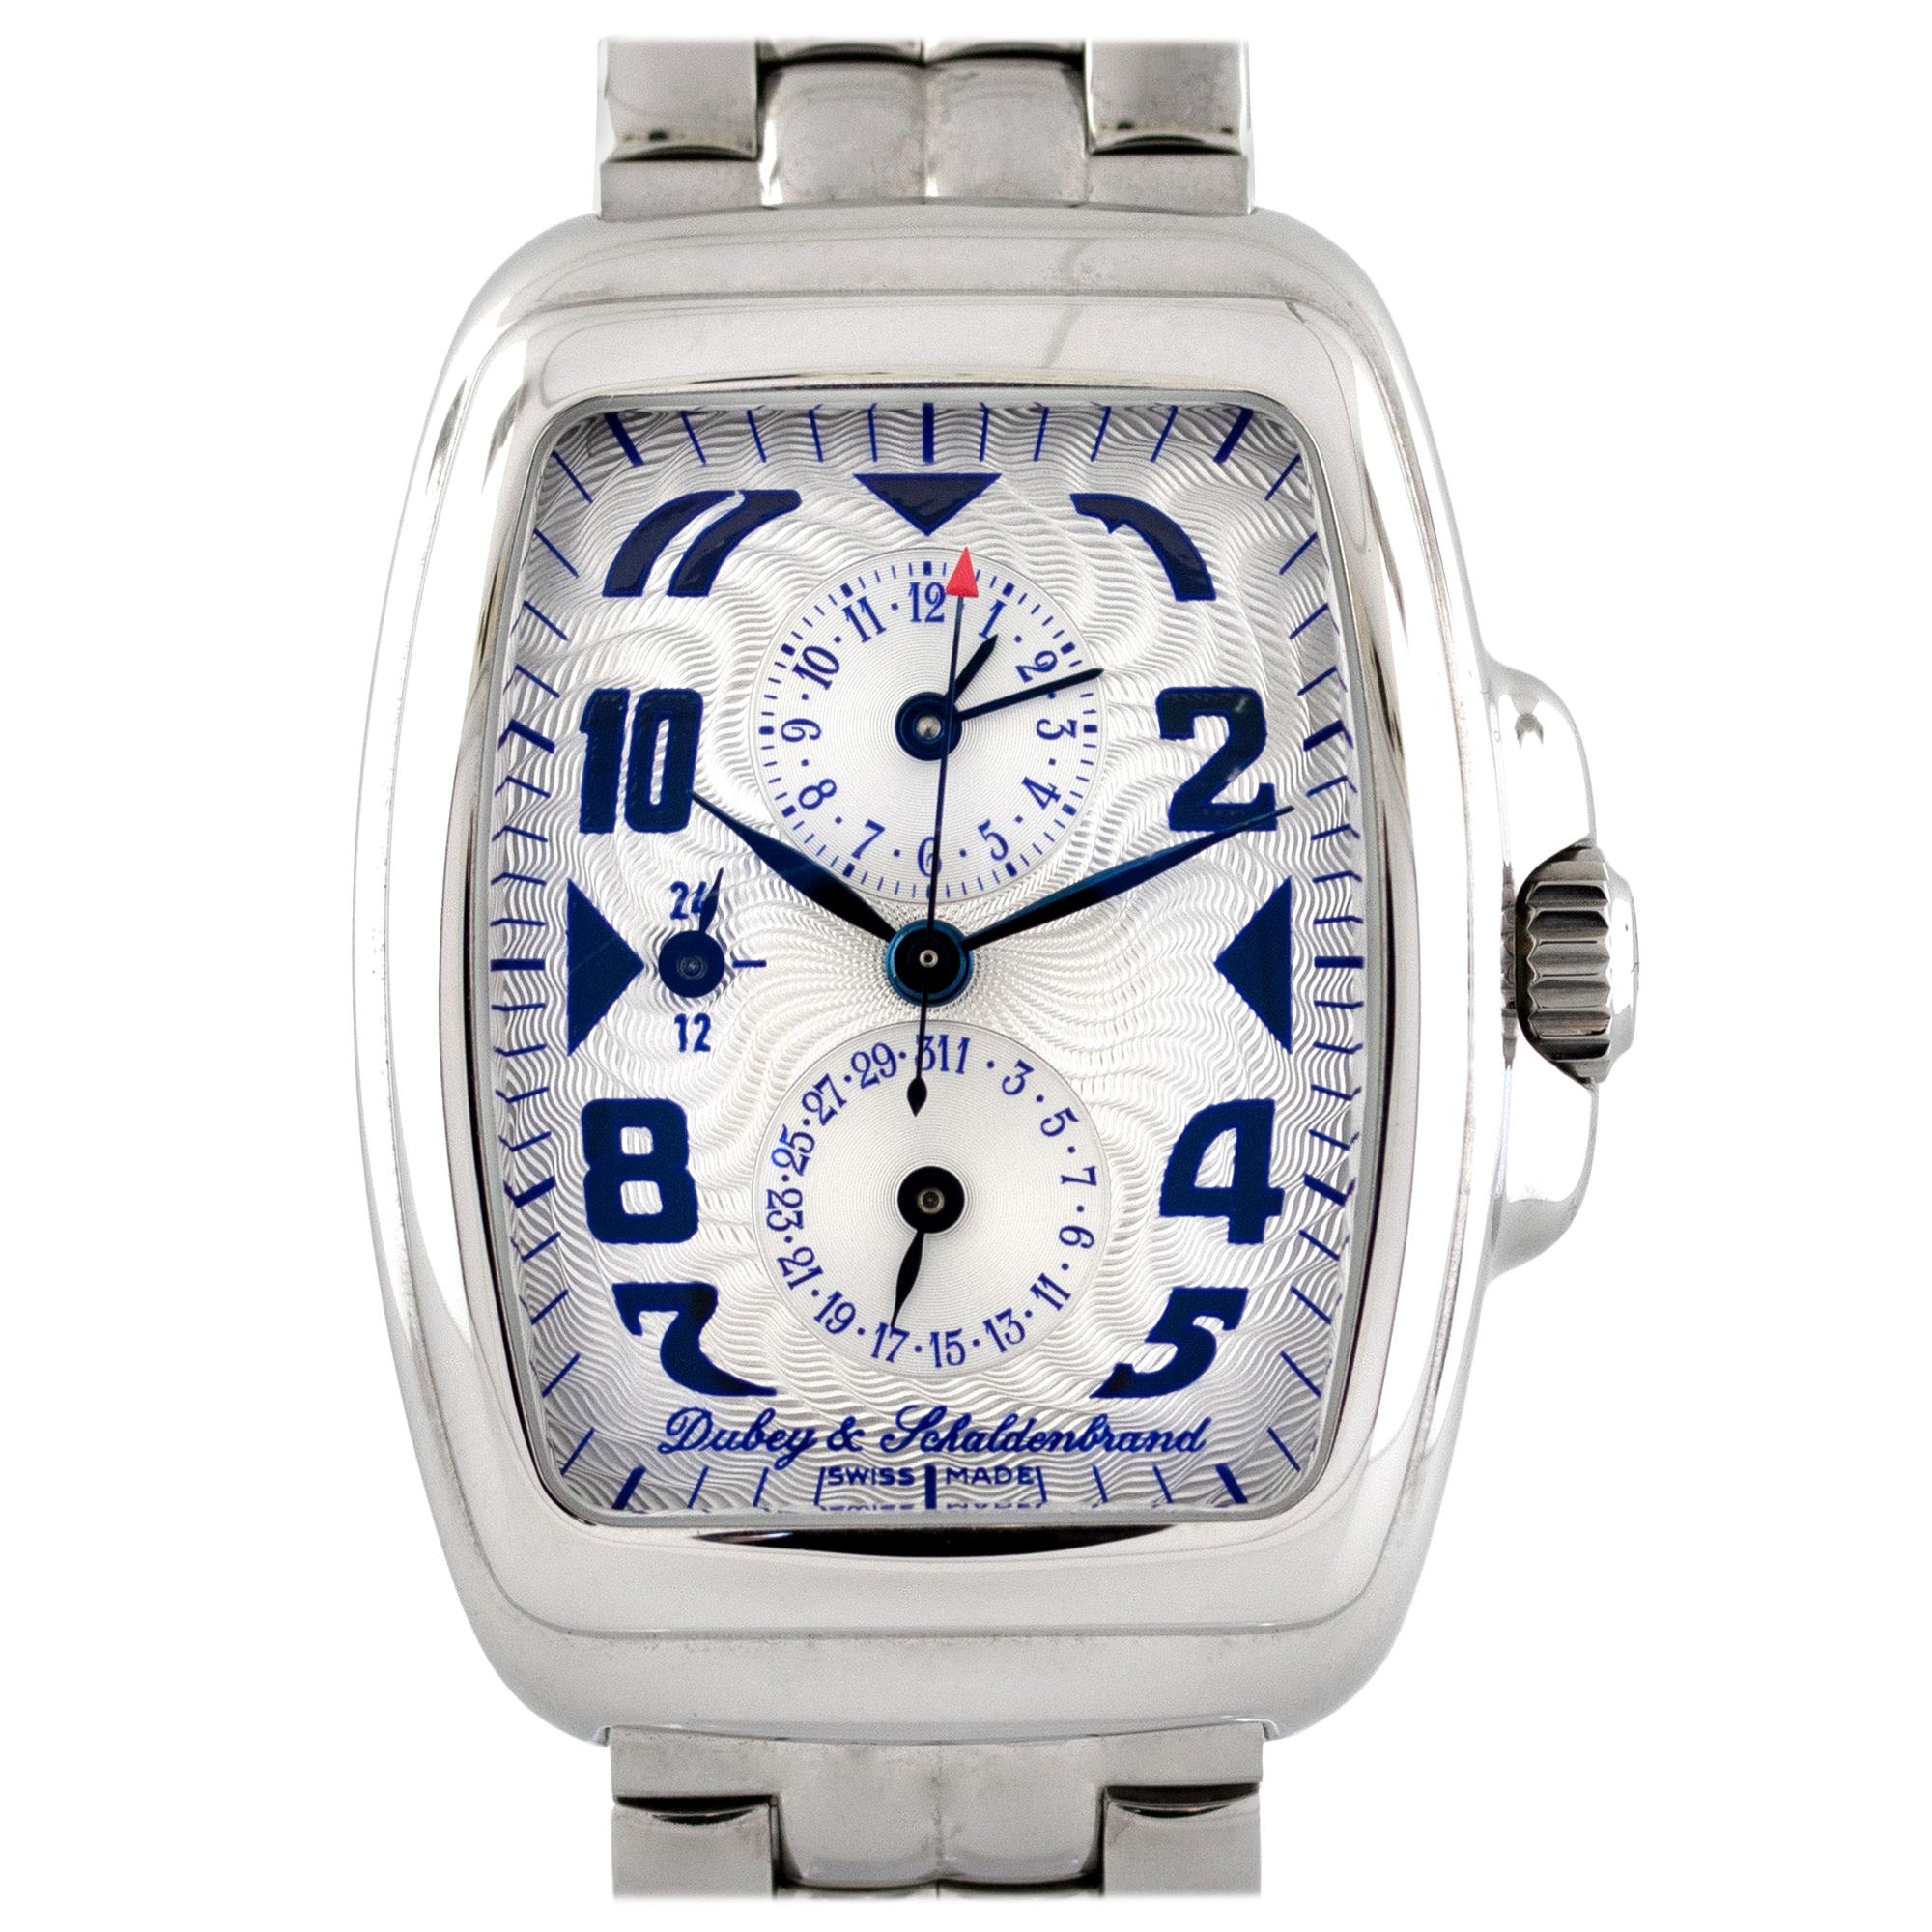 Dubey & Schaldenbrand Aquaduo Stainless Steel Automatic Watch